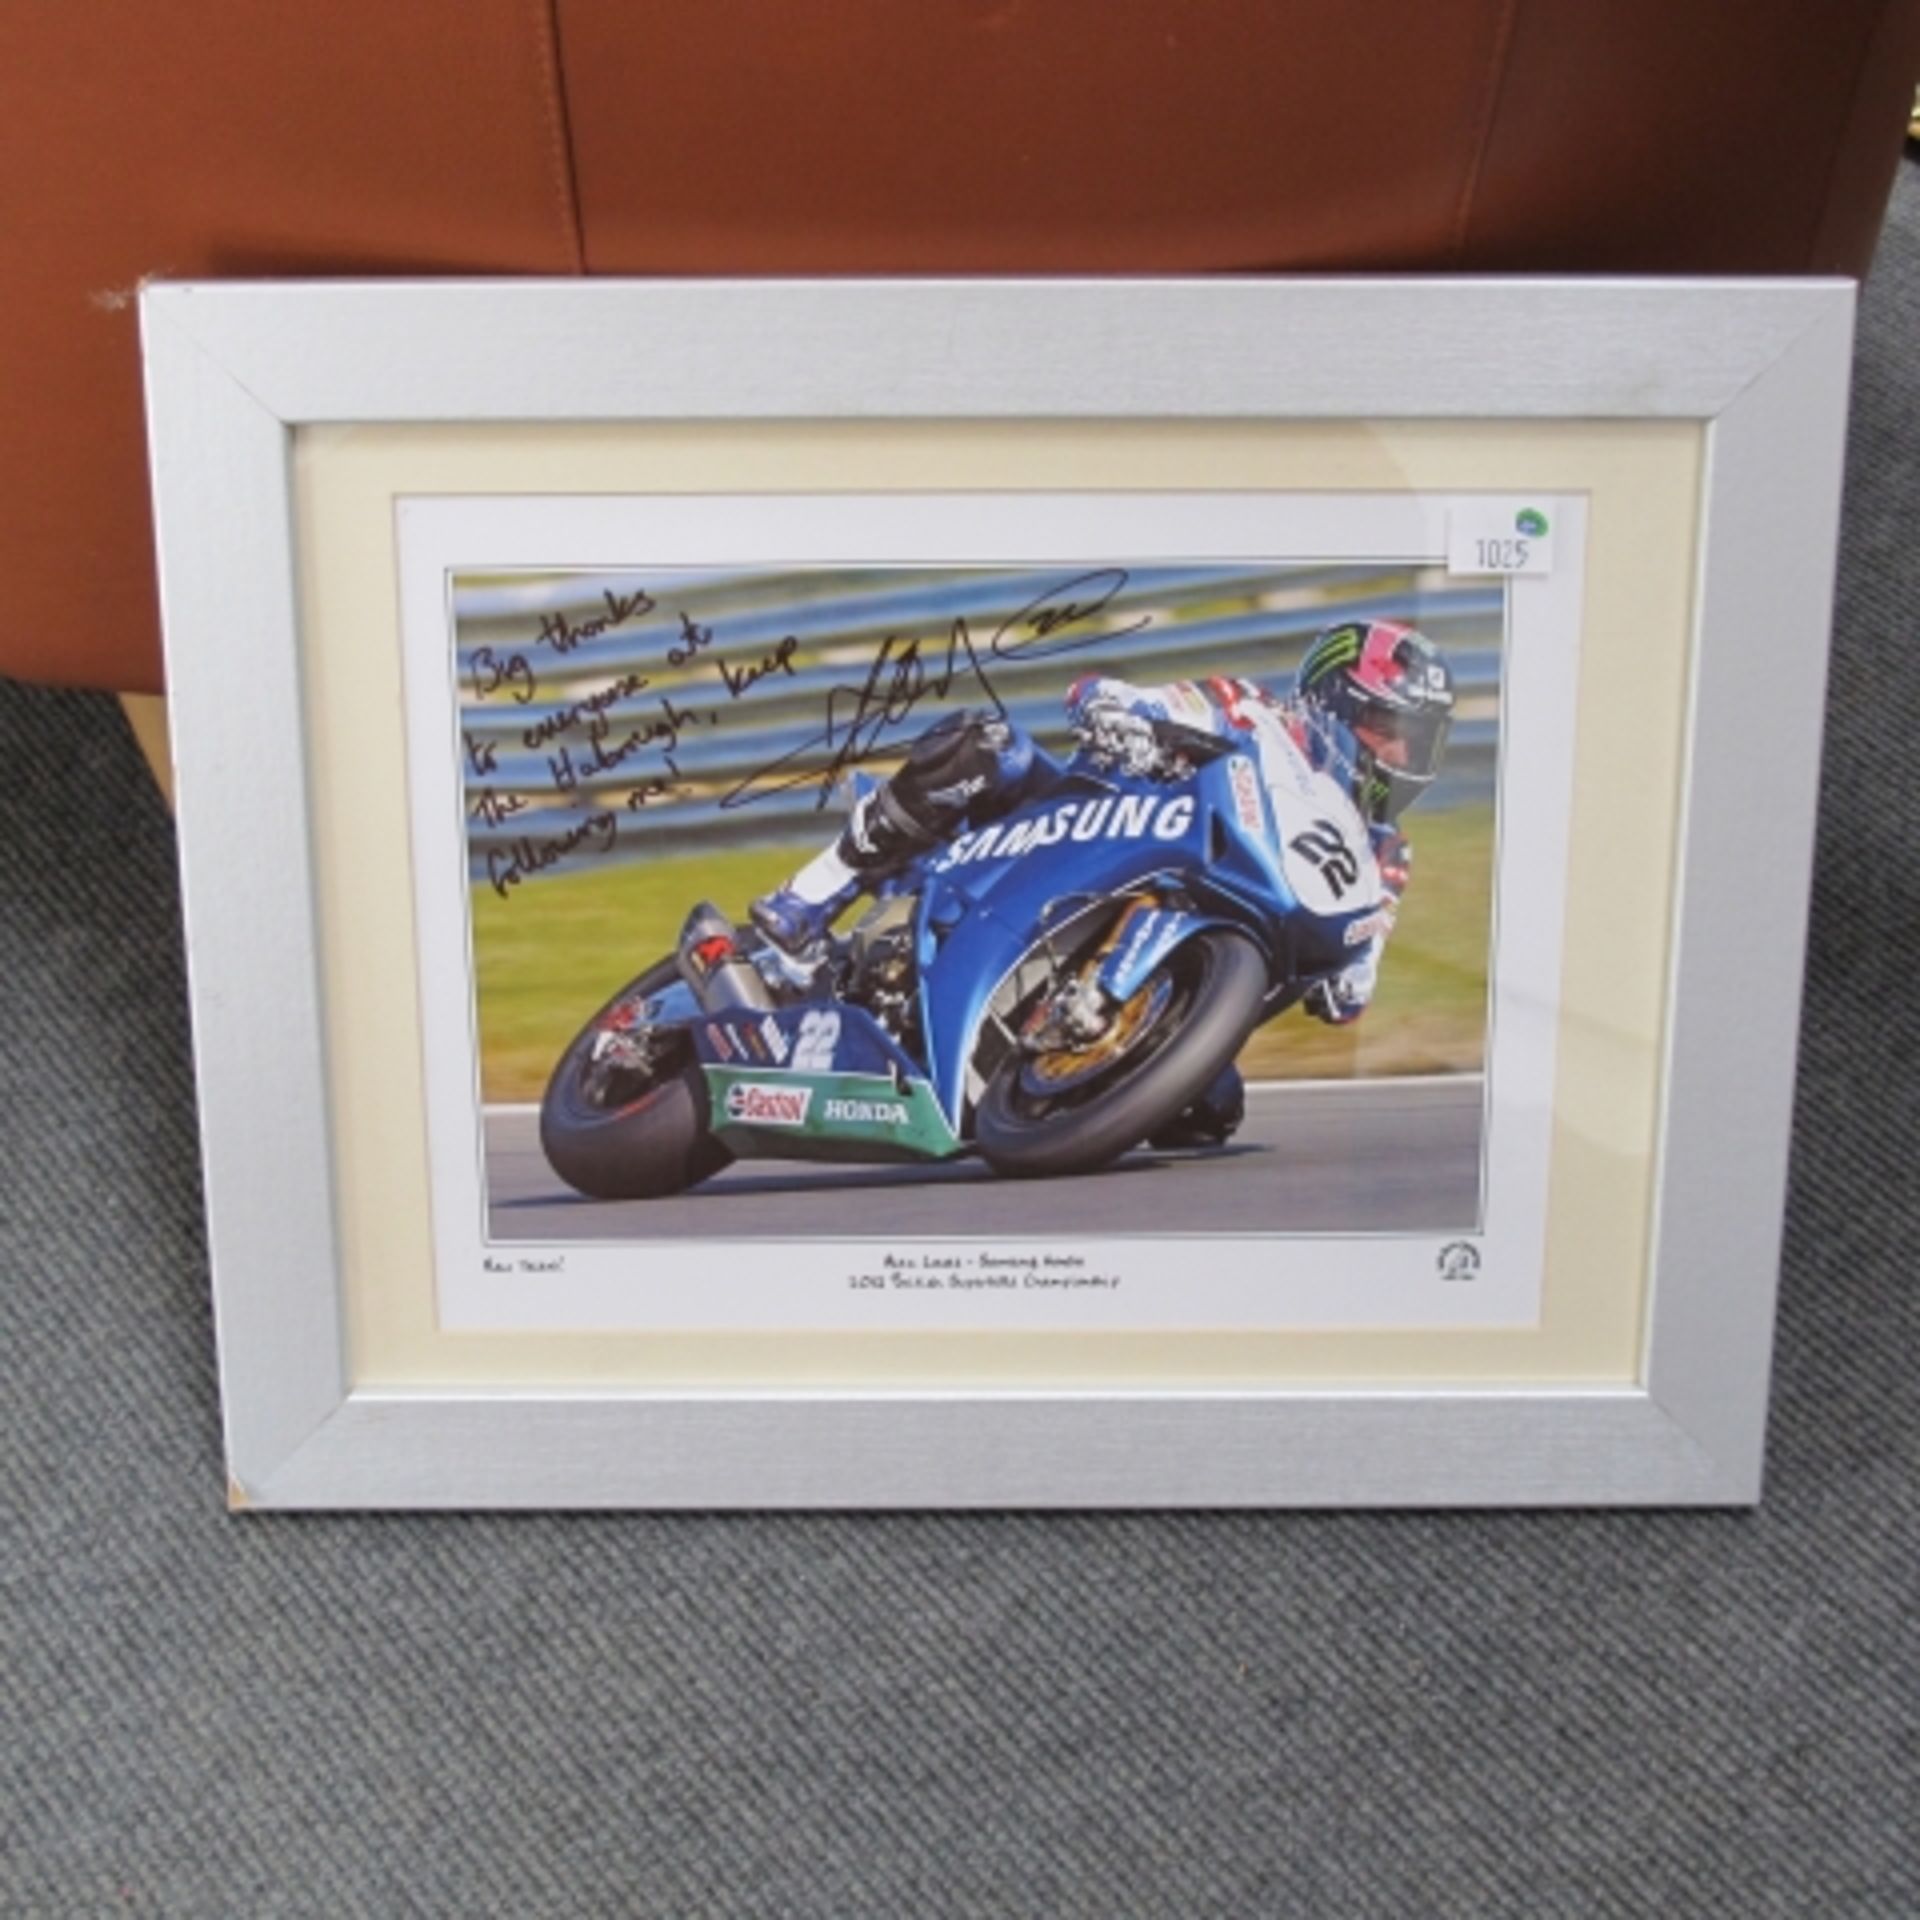 Five furnishing prints including autographed motorcycling print (est. £20-£30) - Image 2 of 5